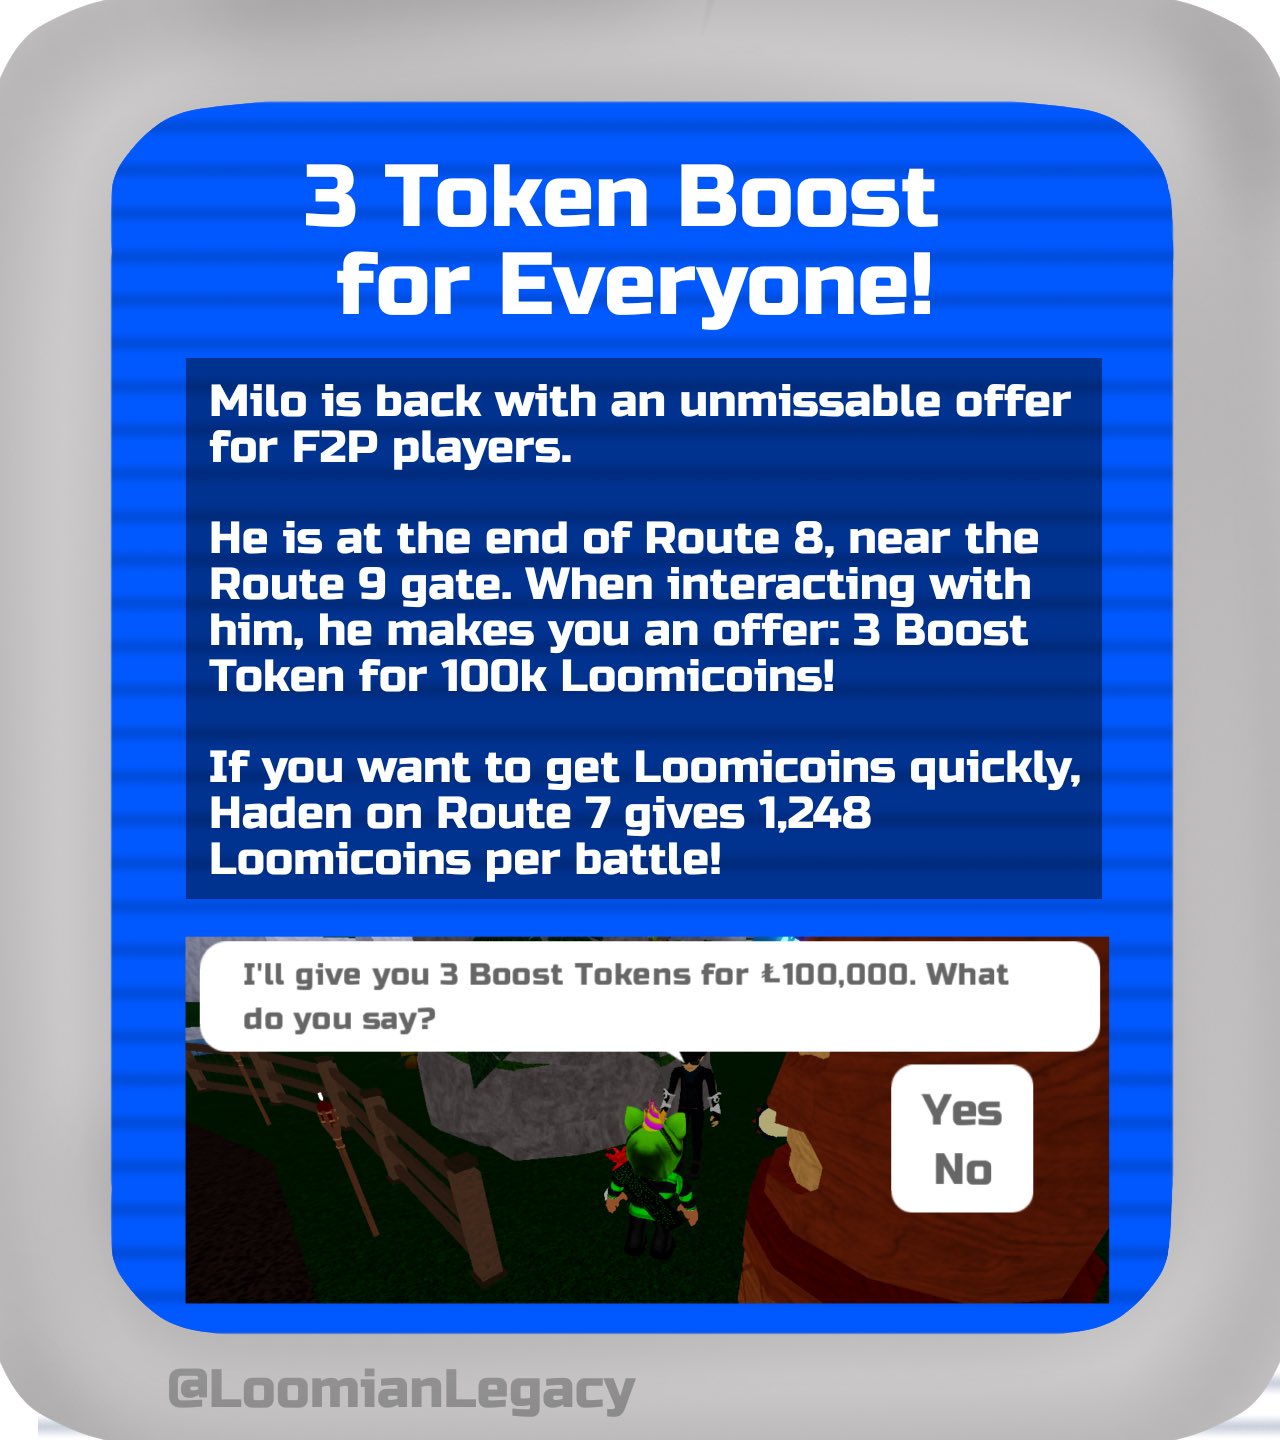 All NEW Loomian Legacy CODES! *Free Boost Tokens, Reskins + More!* 